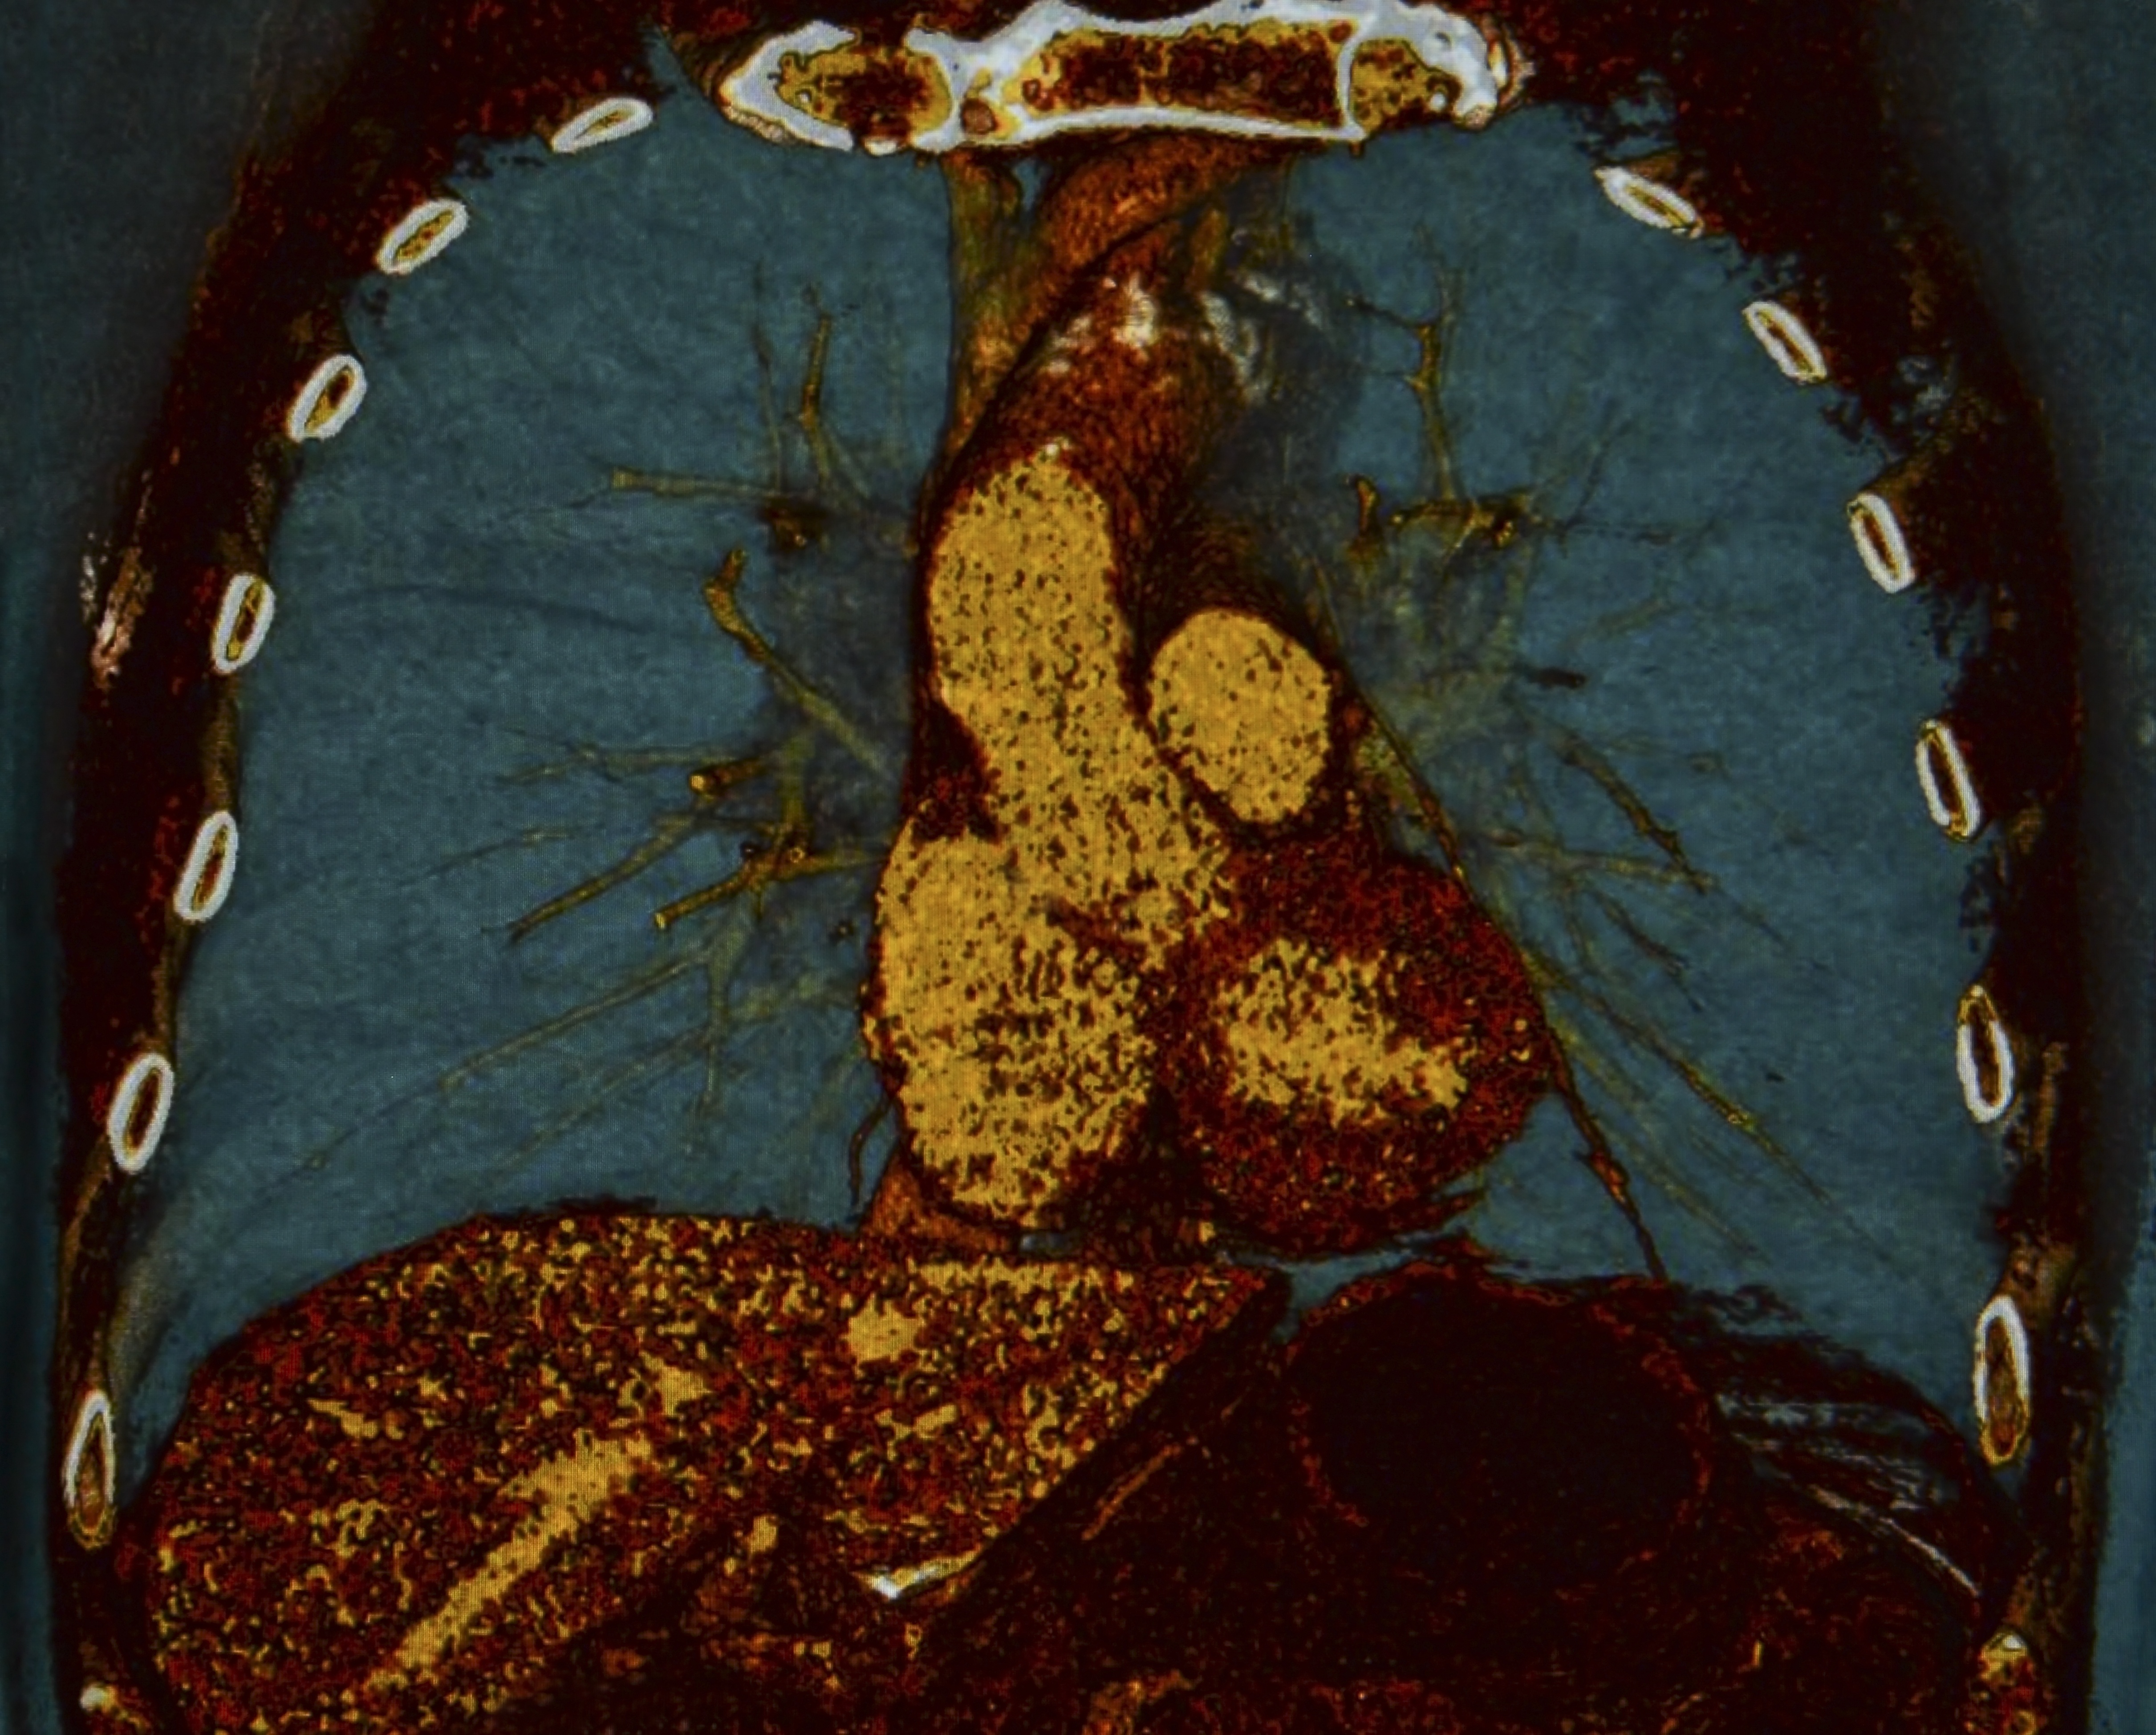 ct scan of the lungs